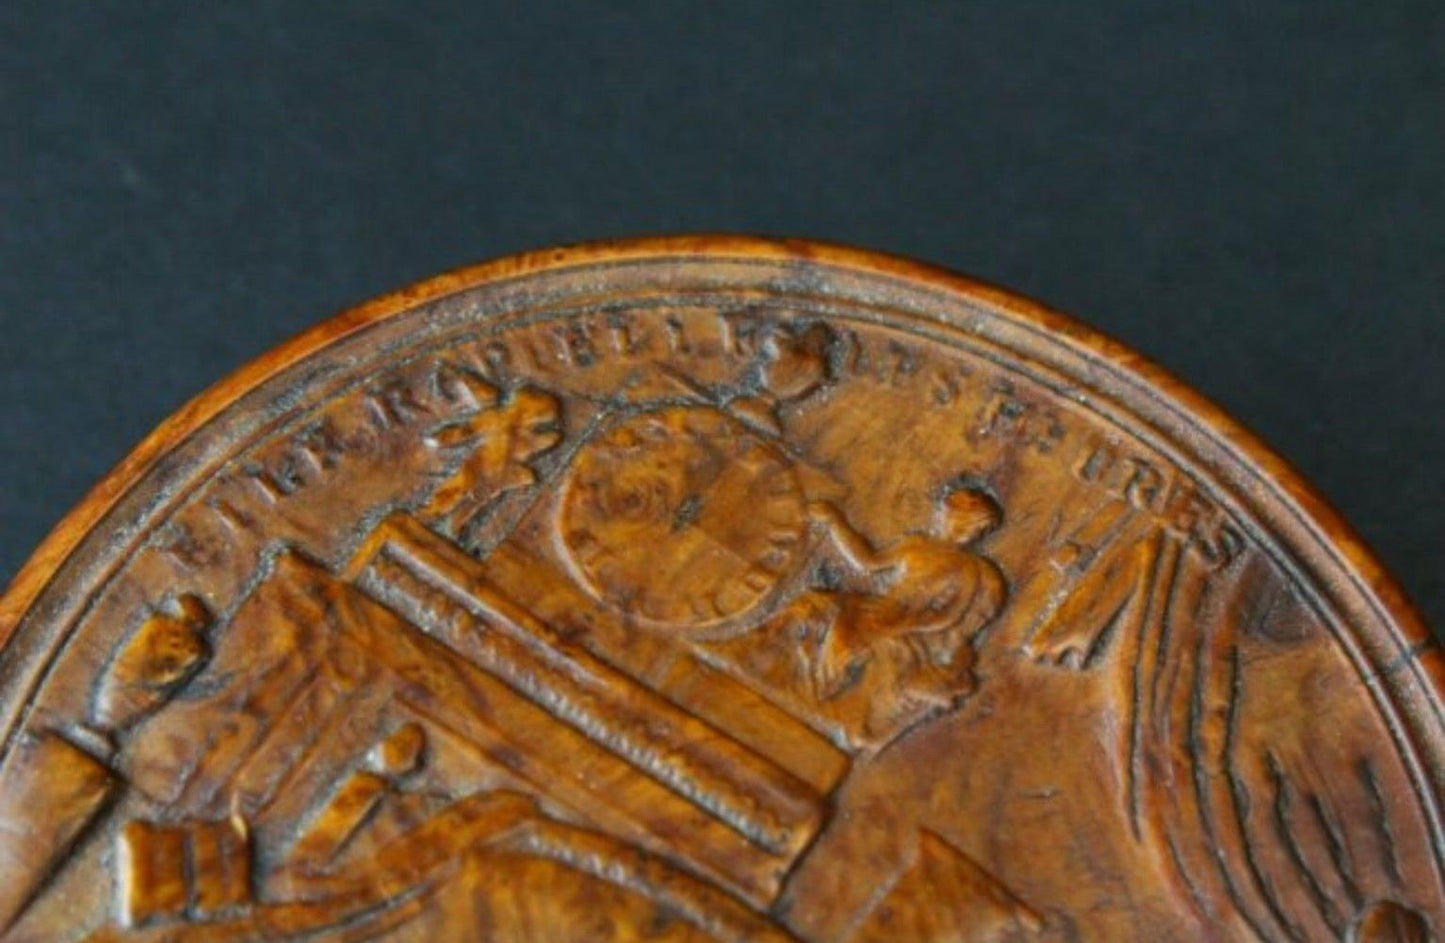 Empire French Pressed Wood Snuff Box, Early 19th Century